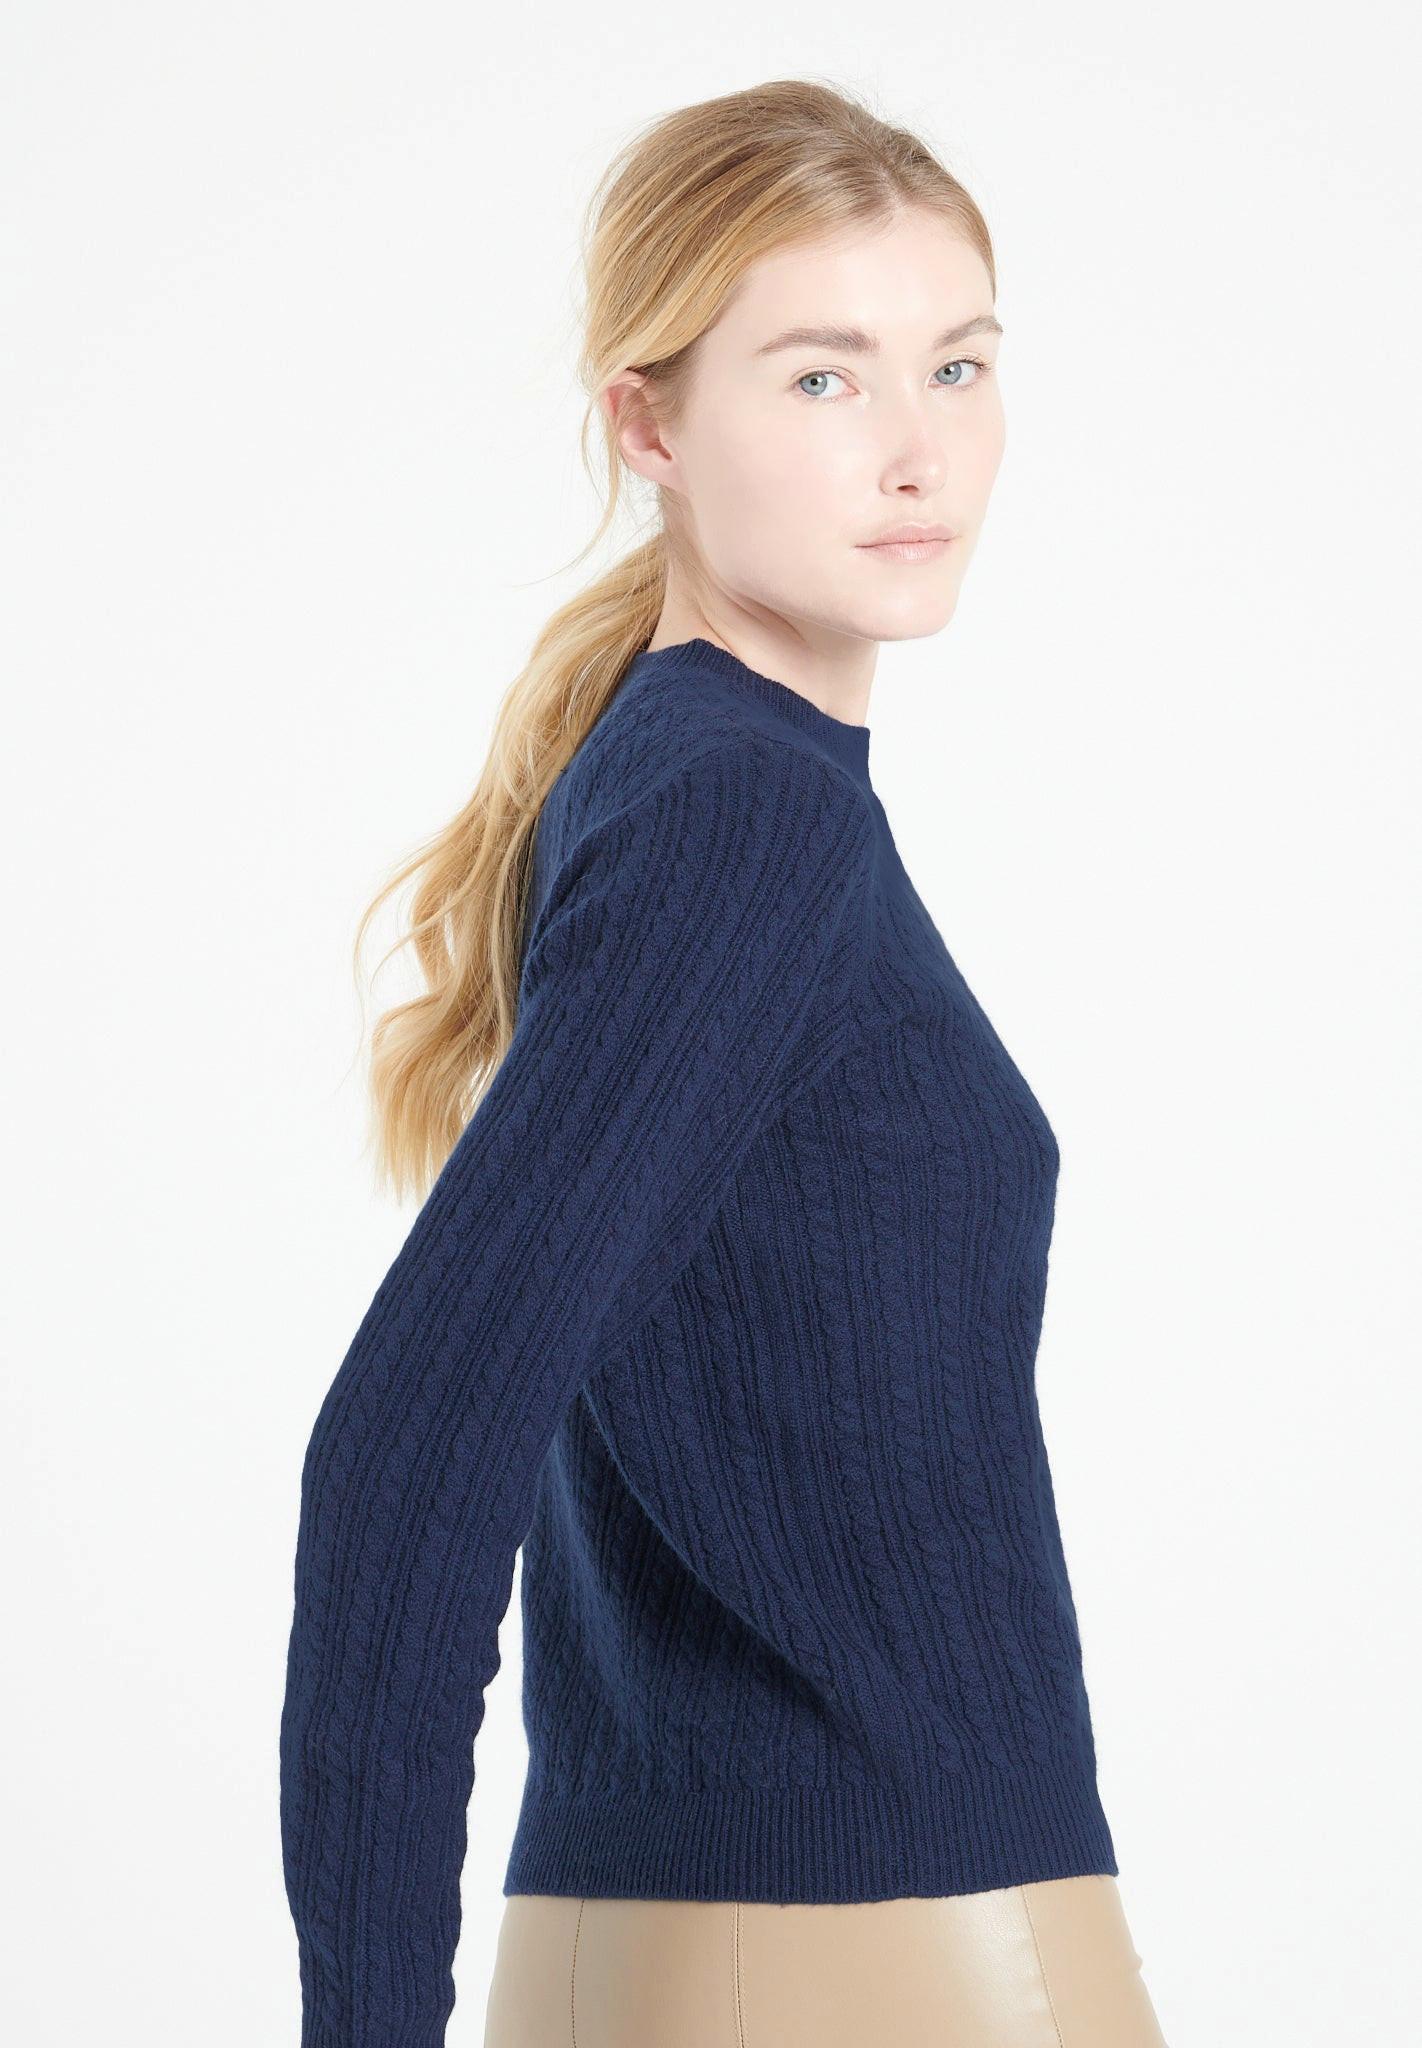 Studio Cashmere8  LILLY 29 Pull col rond 4 fils - 100% cachemire 